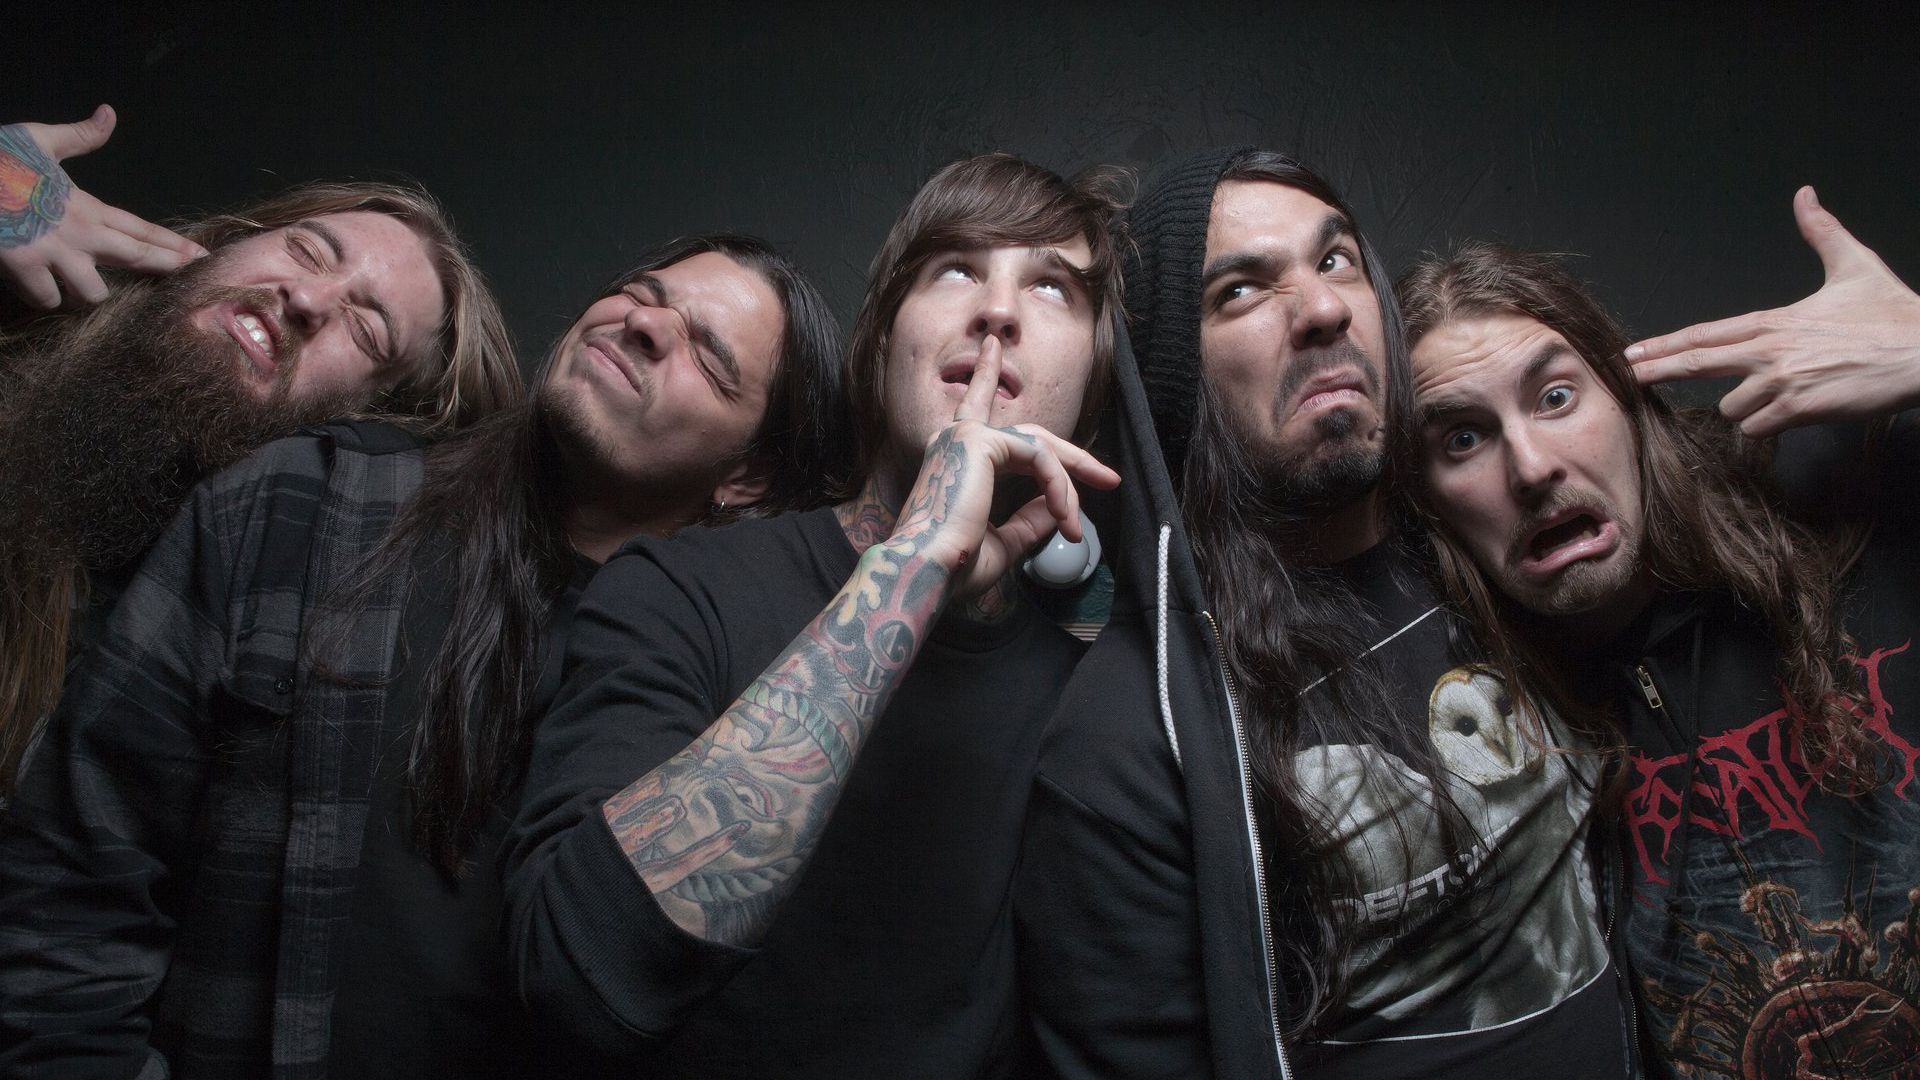 Full HD 1080p Suicide silence Wallpapers HD, Desktop Backgrounds ...